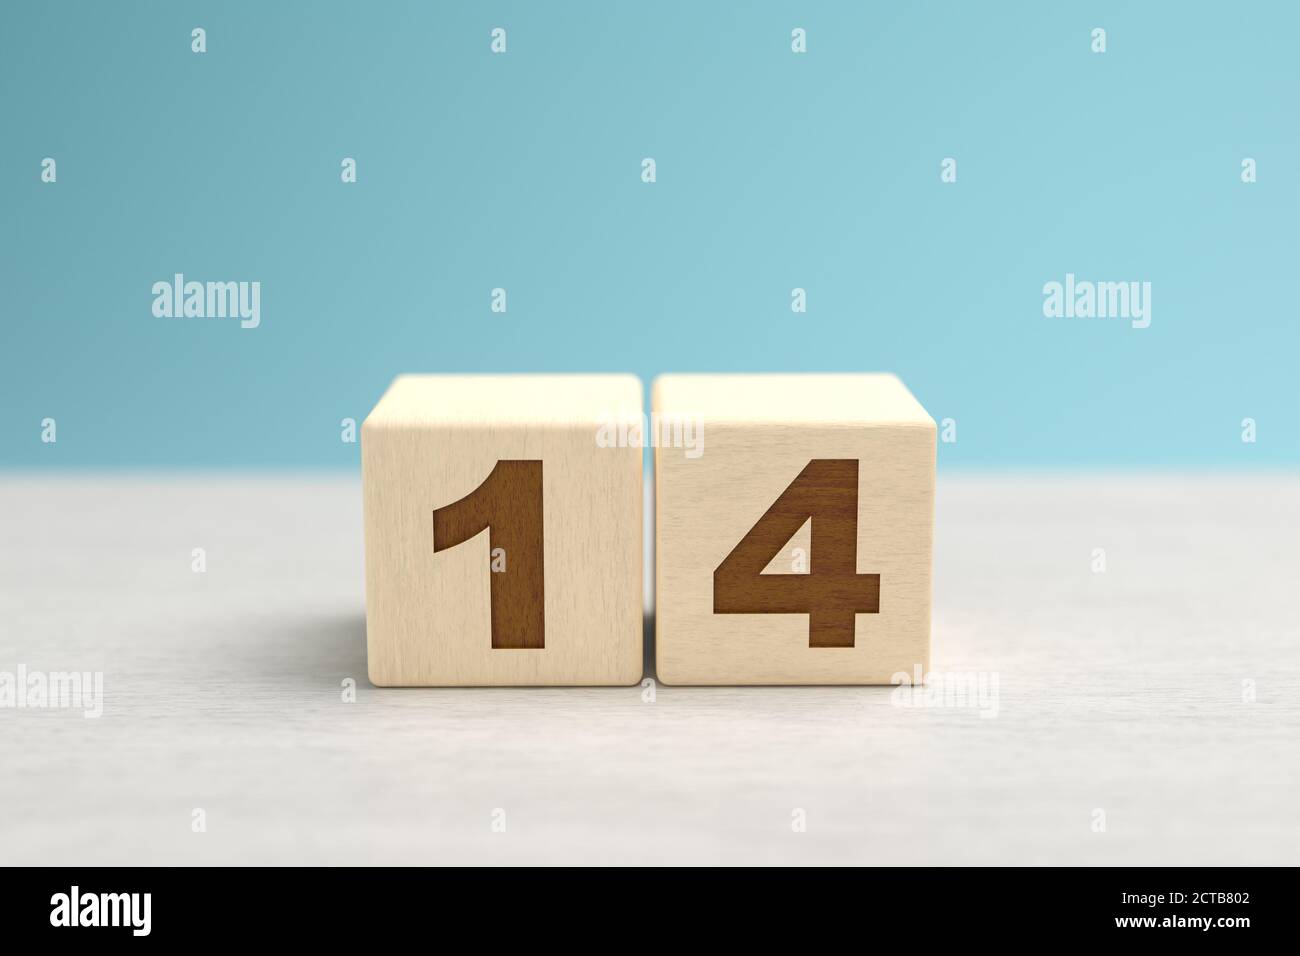 Wooden toy blocks forming the number 14. Stock Photo